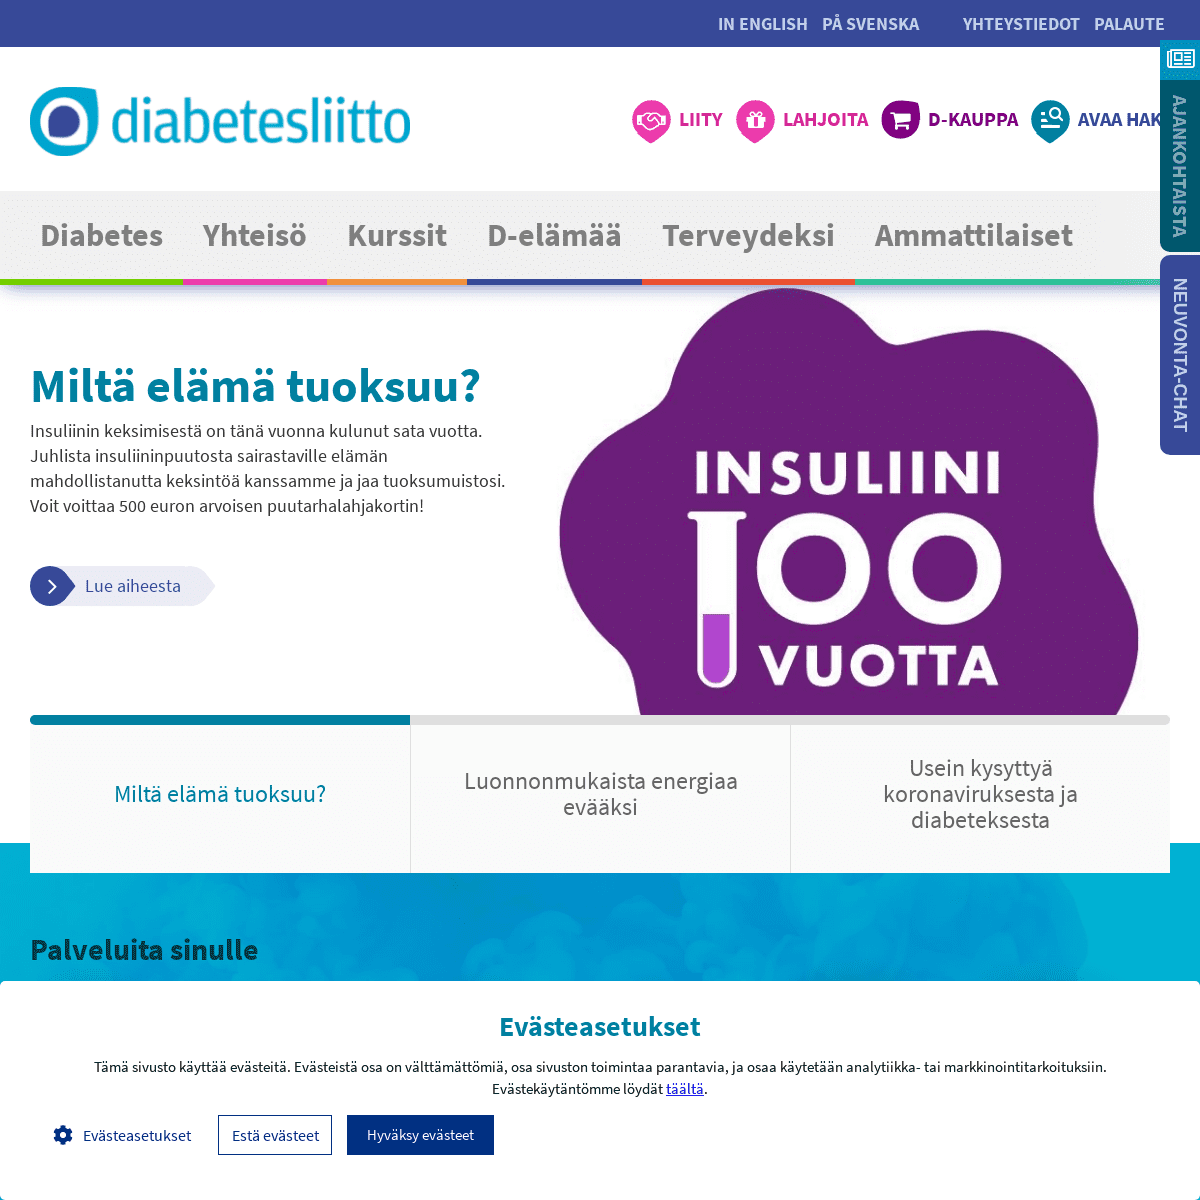 A complete backup of https://diabetes.fi